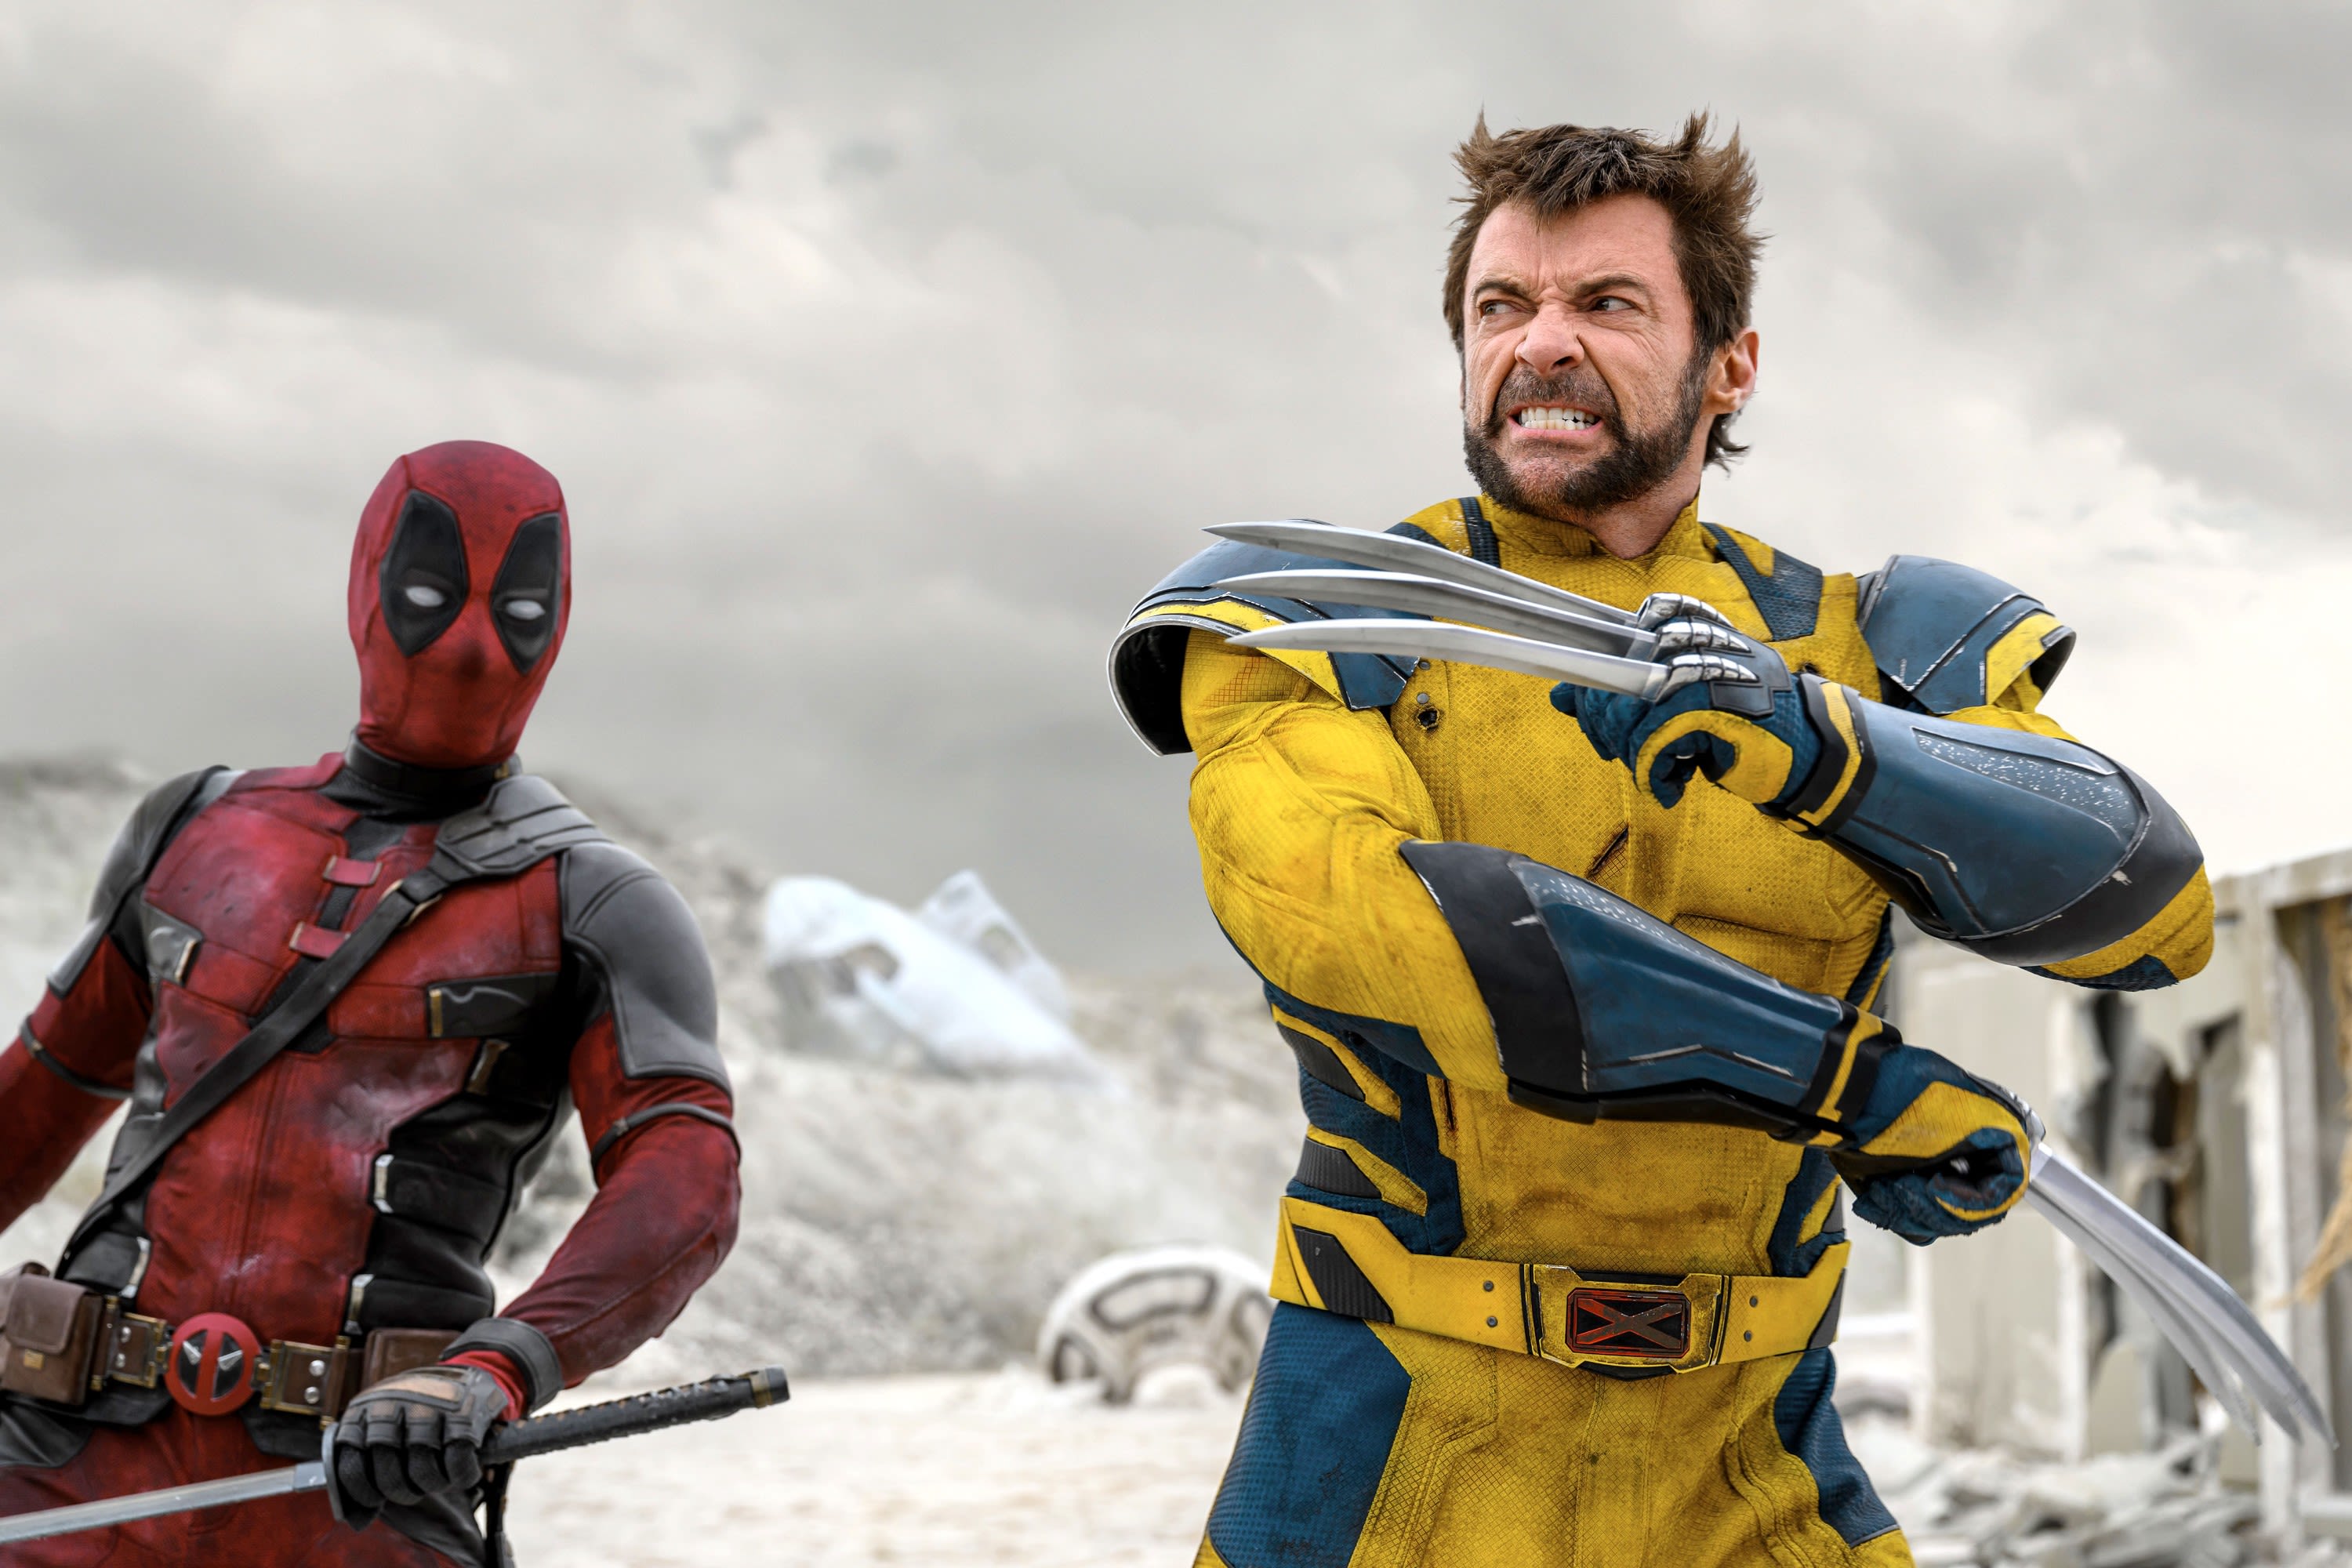 ‘Deadpool & Wolverine’ At $211M, Now The 6th Highest Opening Of All-Time At U.S. Box Office – Monday AM Update